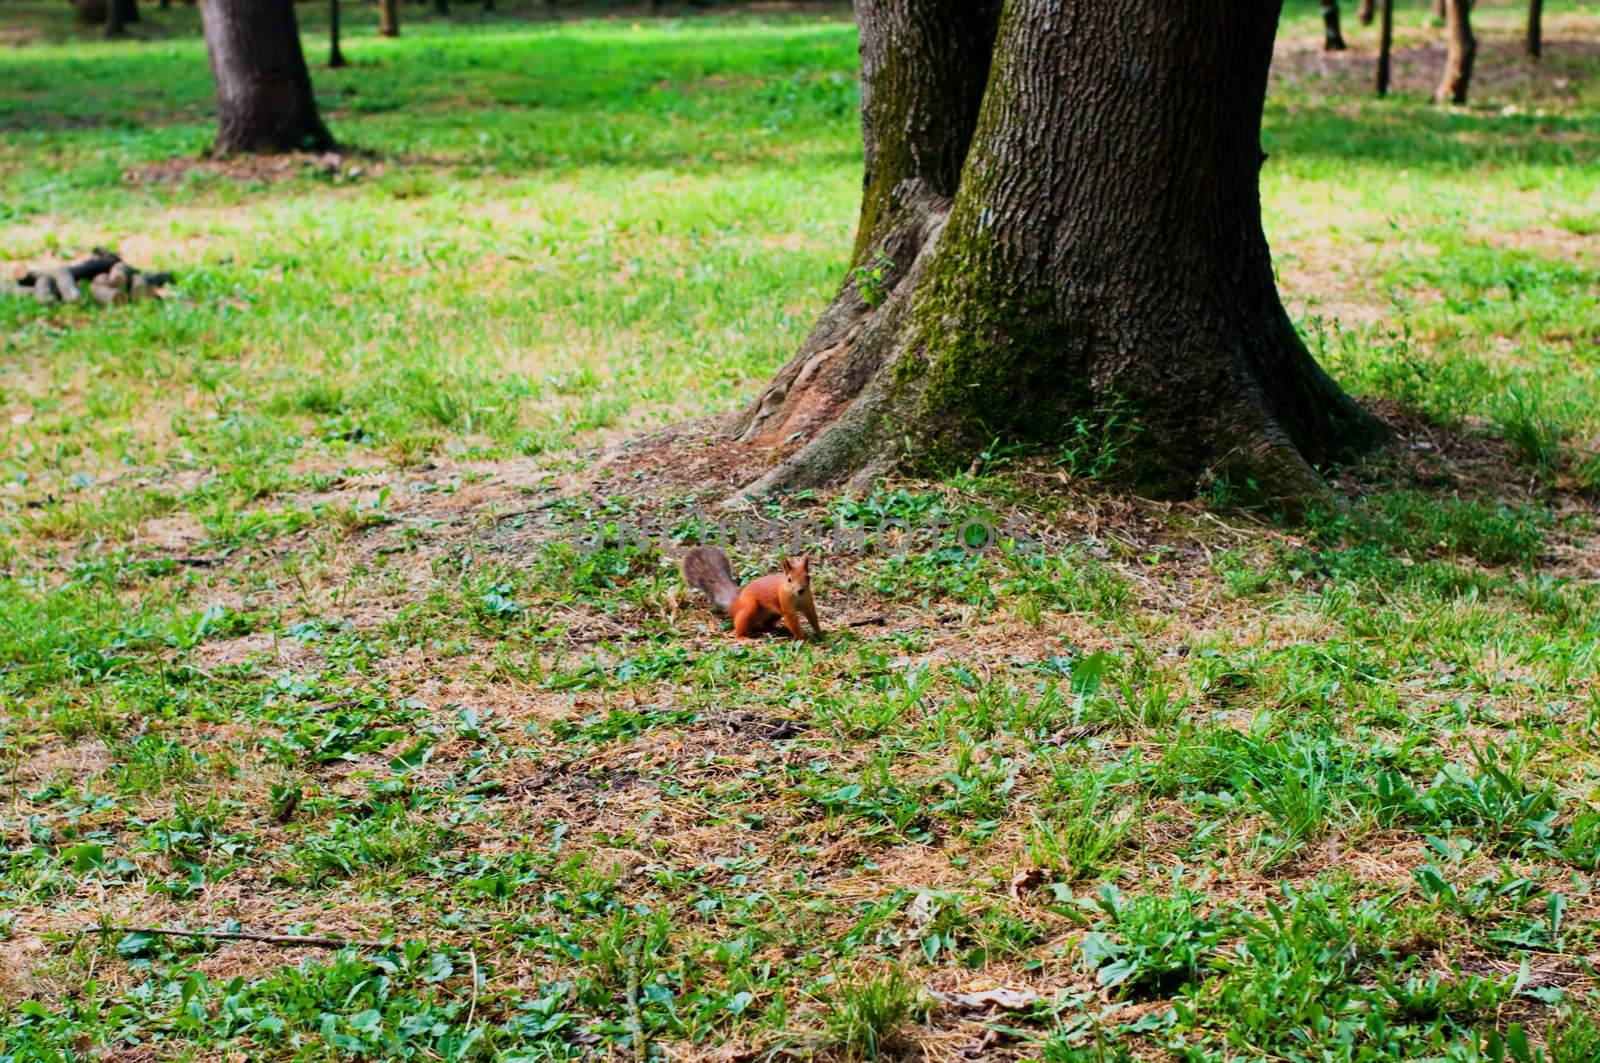 Red squirrel near to about a tree trunk